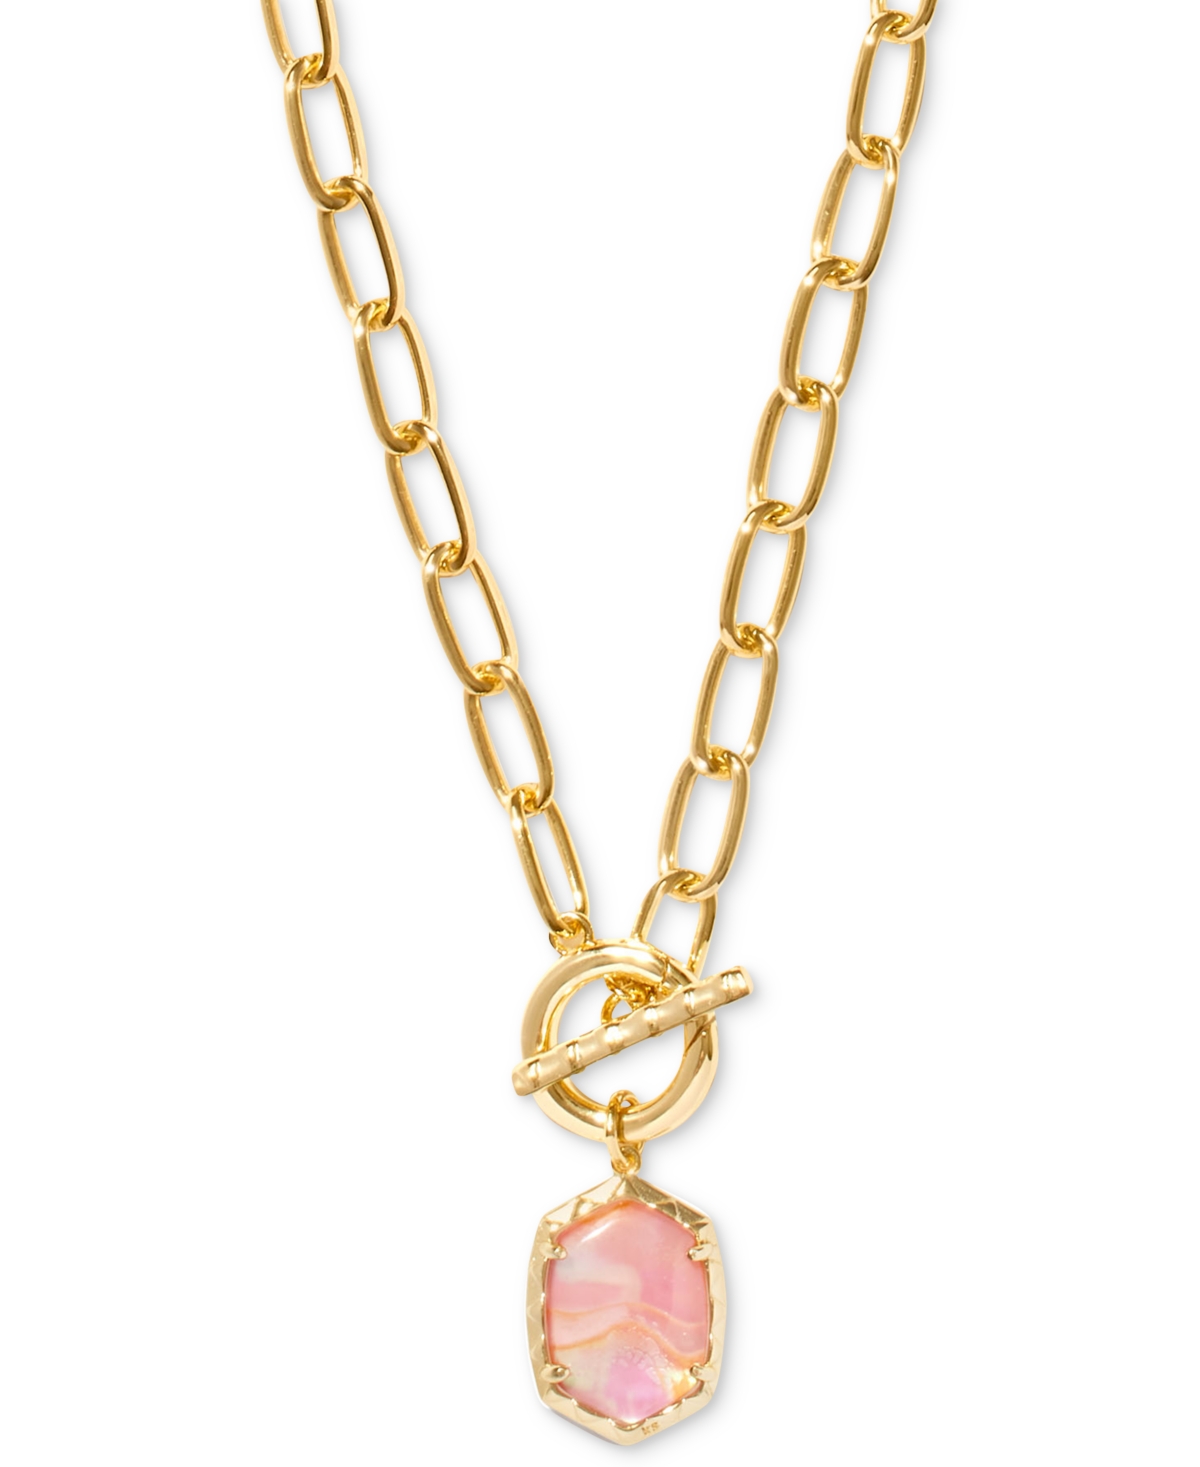 Kendra Scott 14k Gold-plated Stone 18" Pendant Necklace In Light Pink Iridescent Abalone